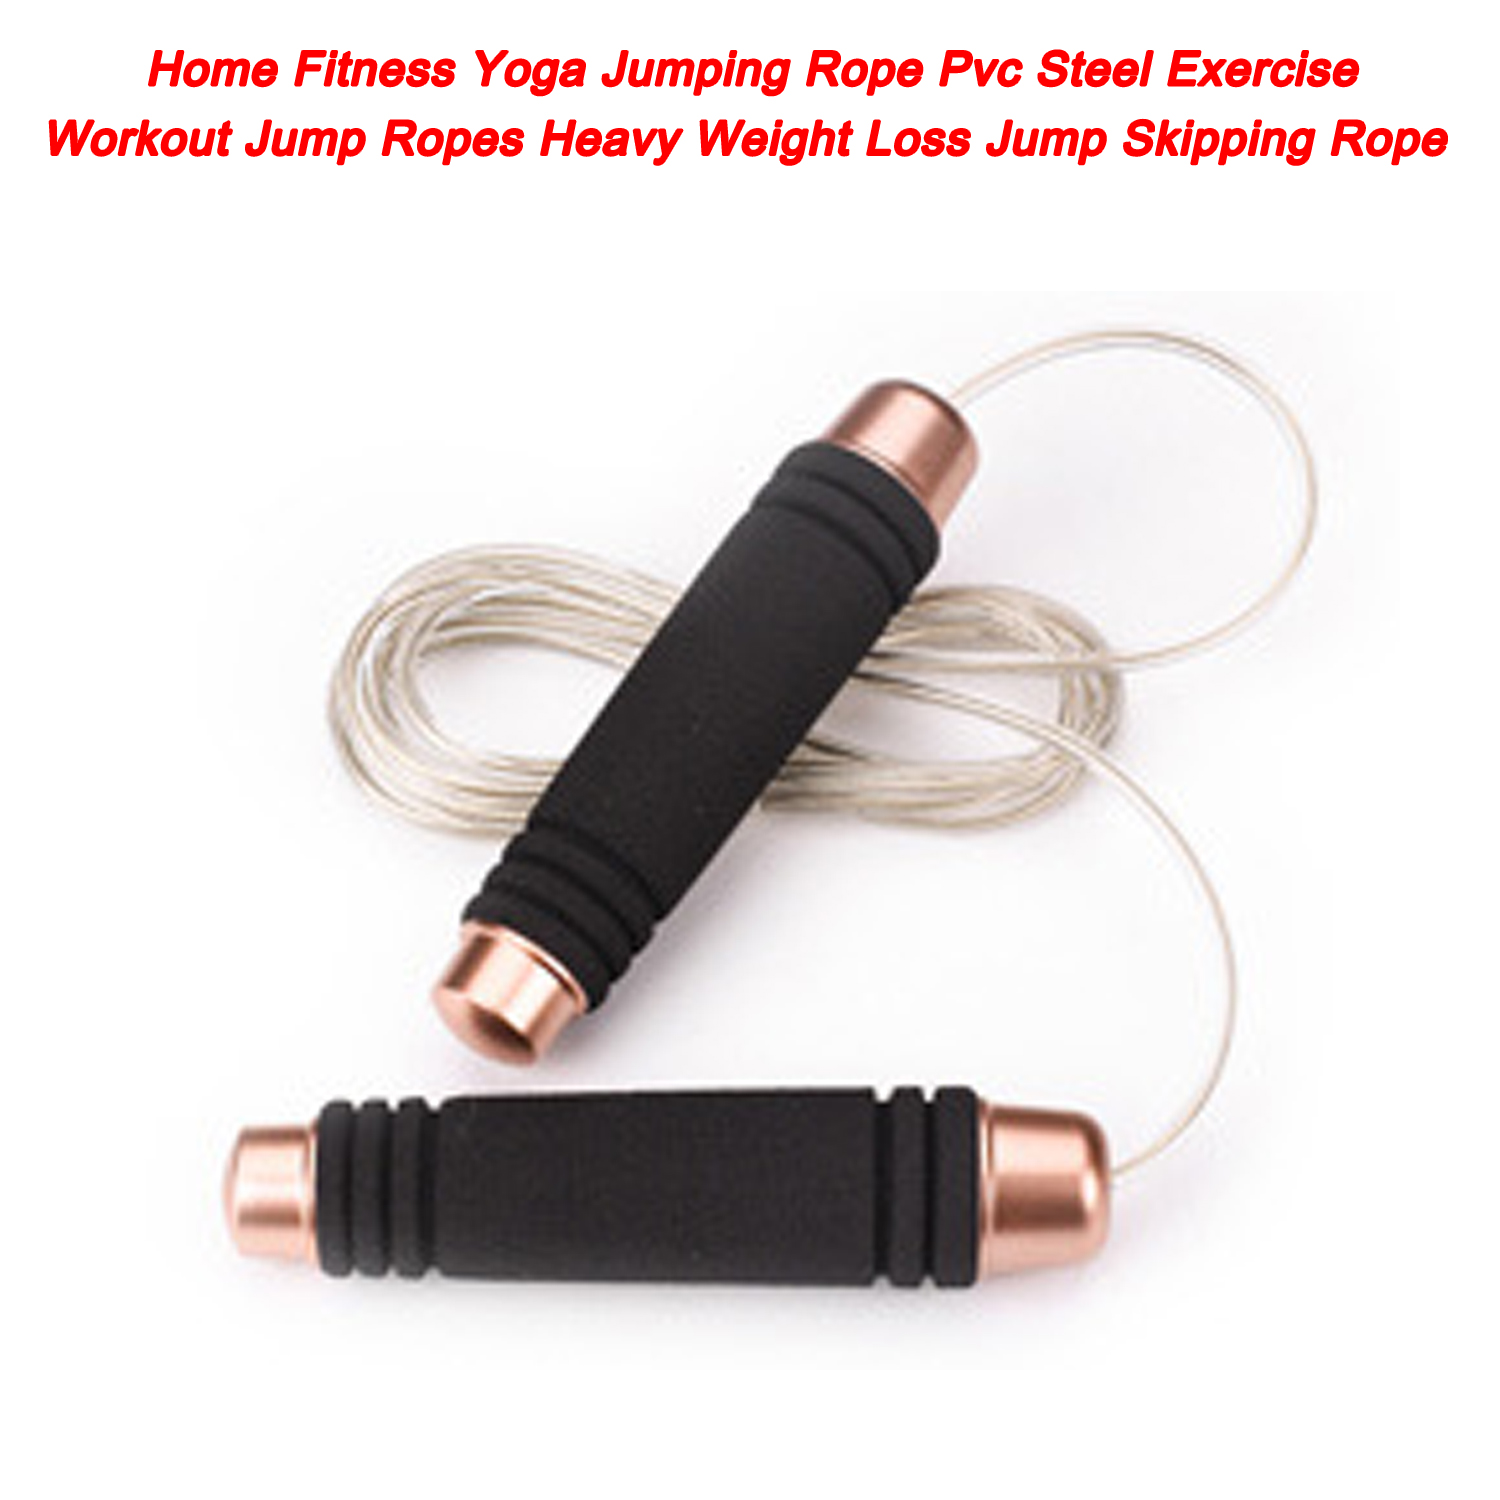 Home Fitness Yoga Jumping Rope Pvc Steel Exercise Workout Jump Ropes Heavy Weight Loss Jump Skipping Rope